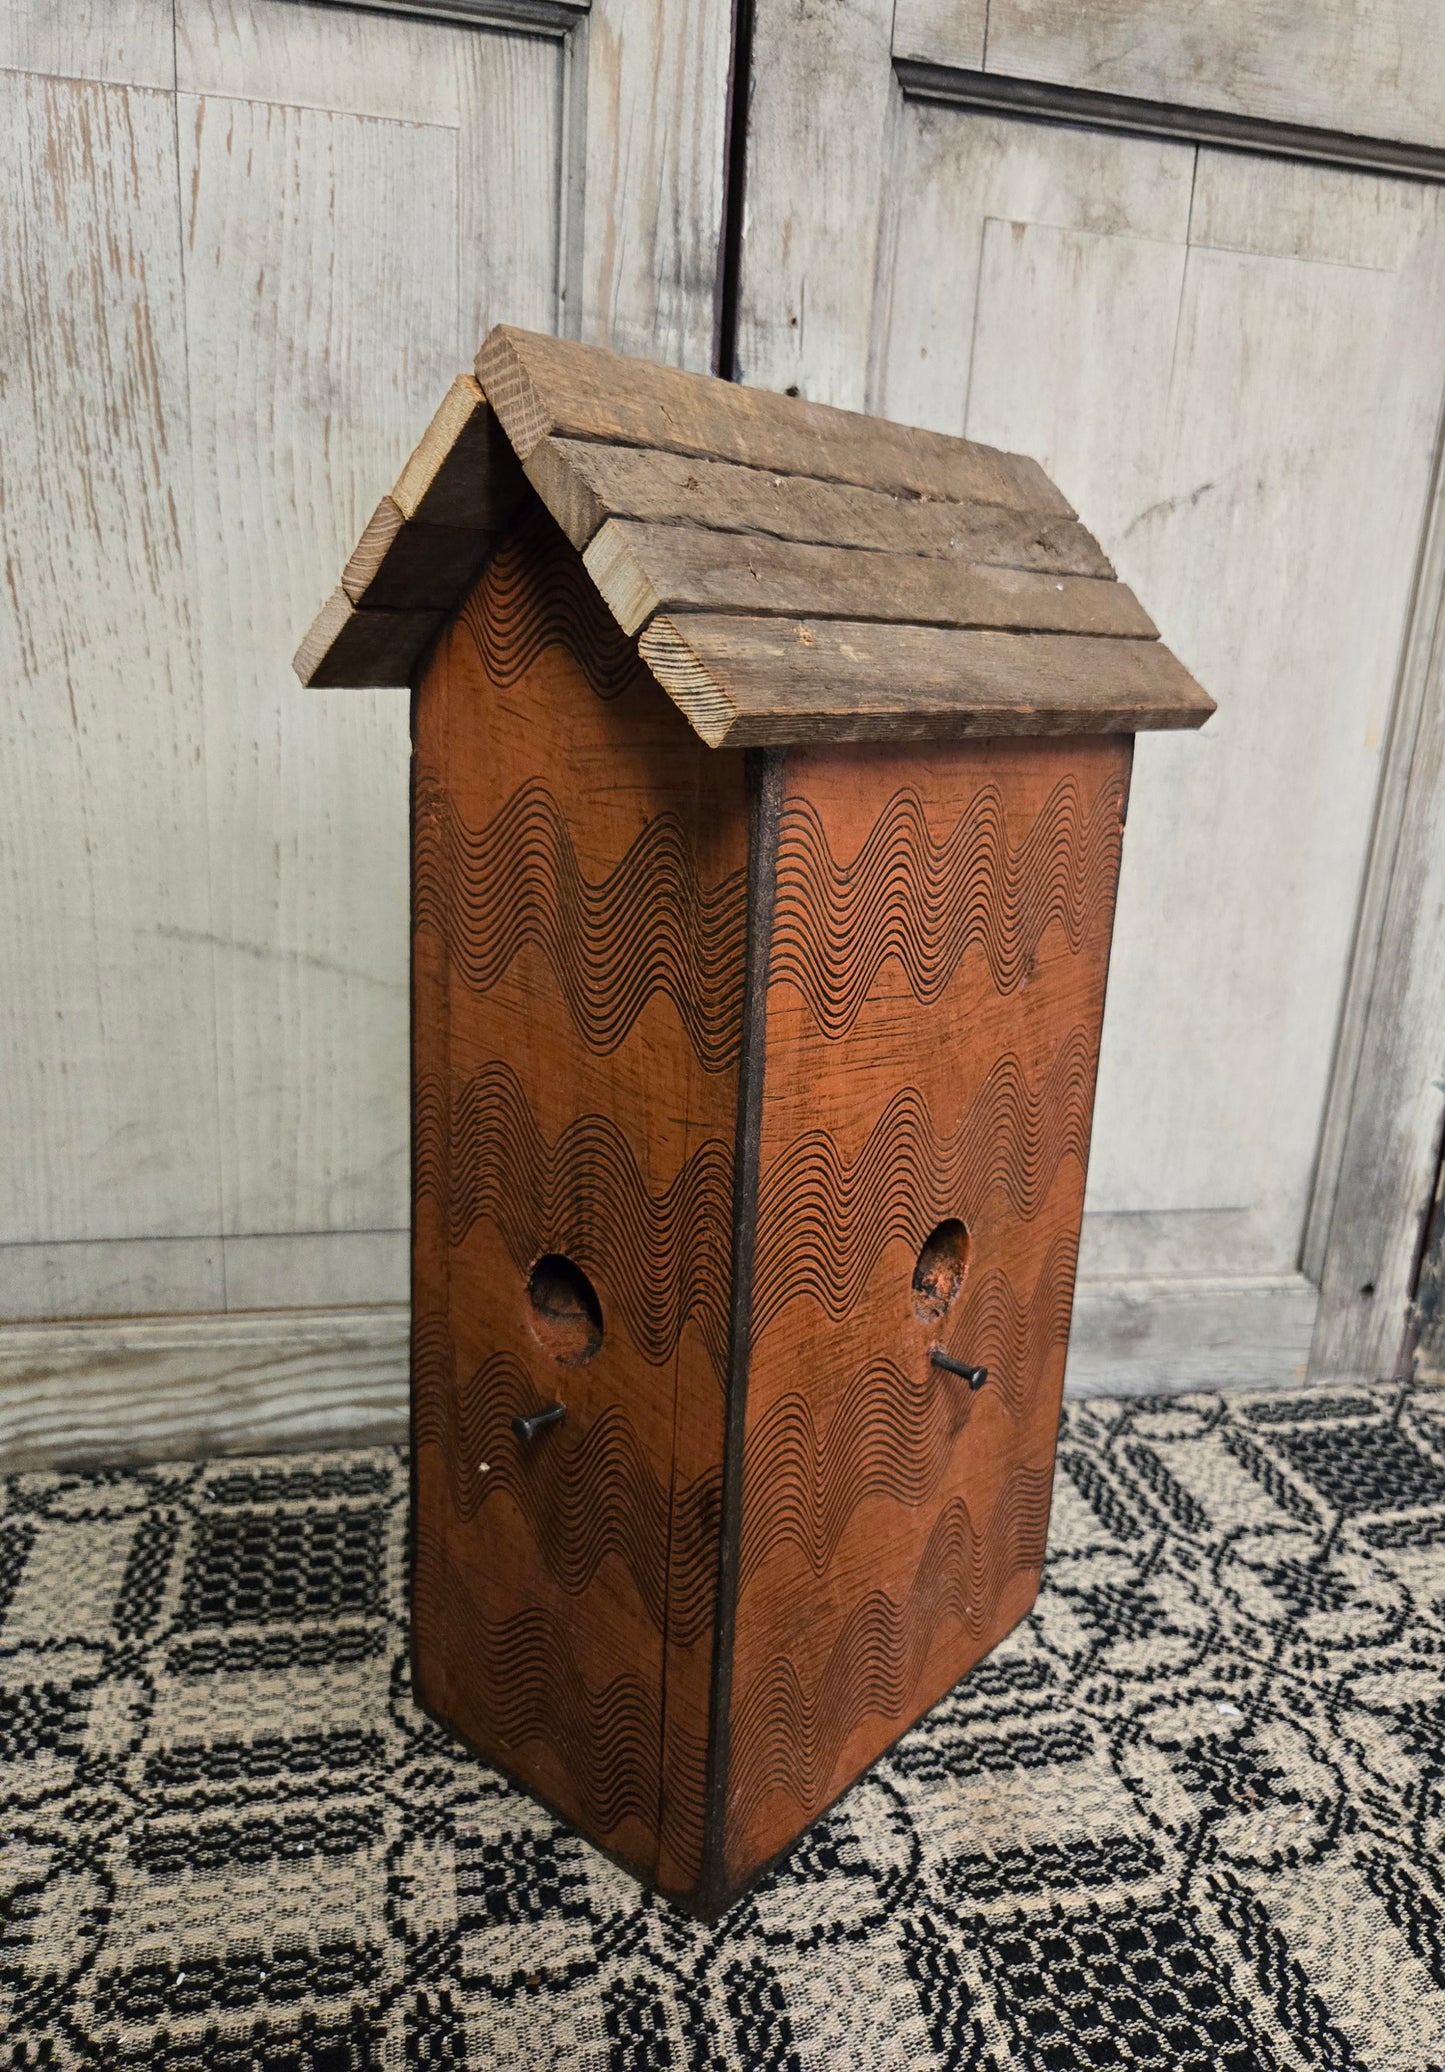 Collection of Combed Birdhouses